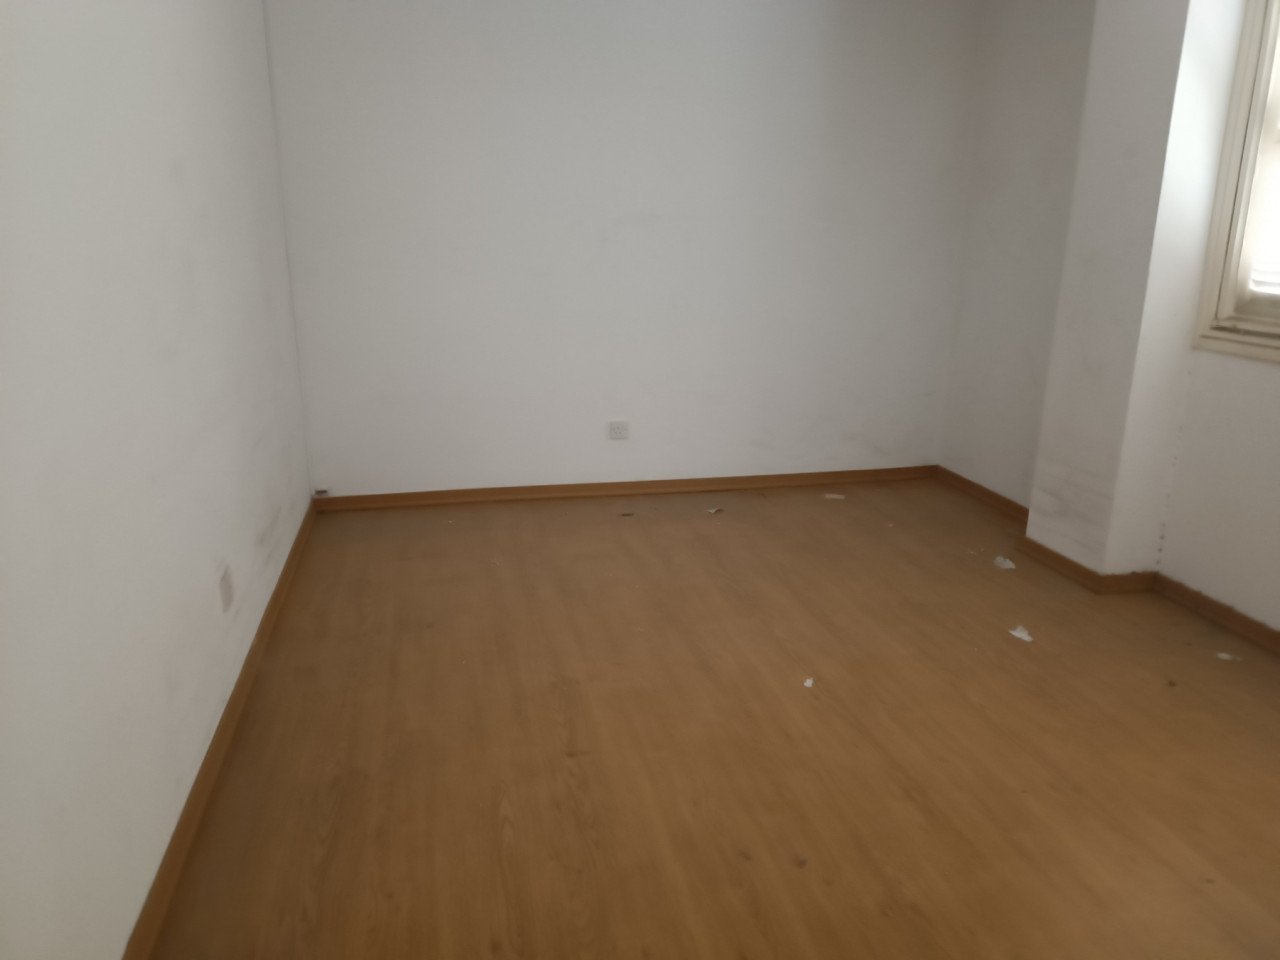 Property for Rent: Commercial (Office) in City Center, Nicosia for Rent | Key Realtor Cyprus